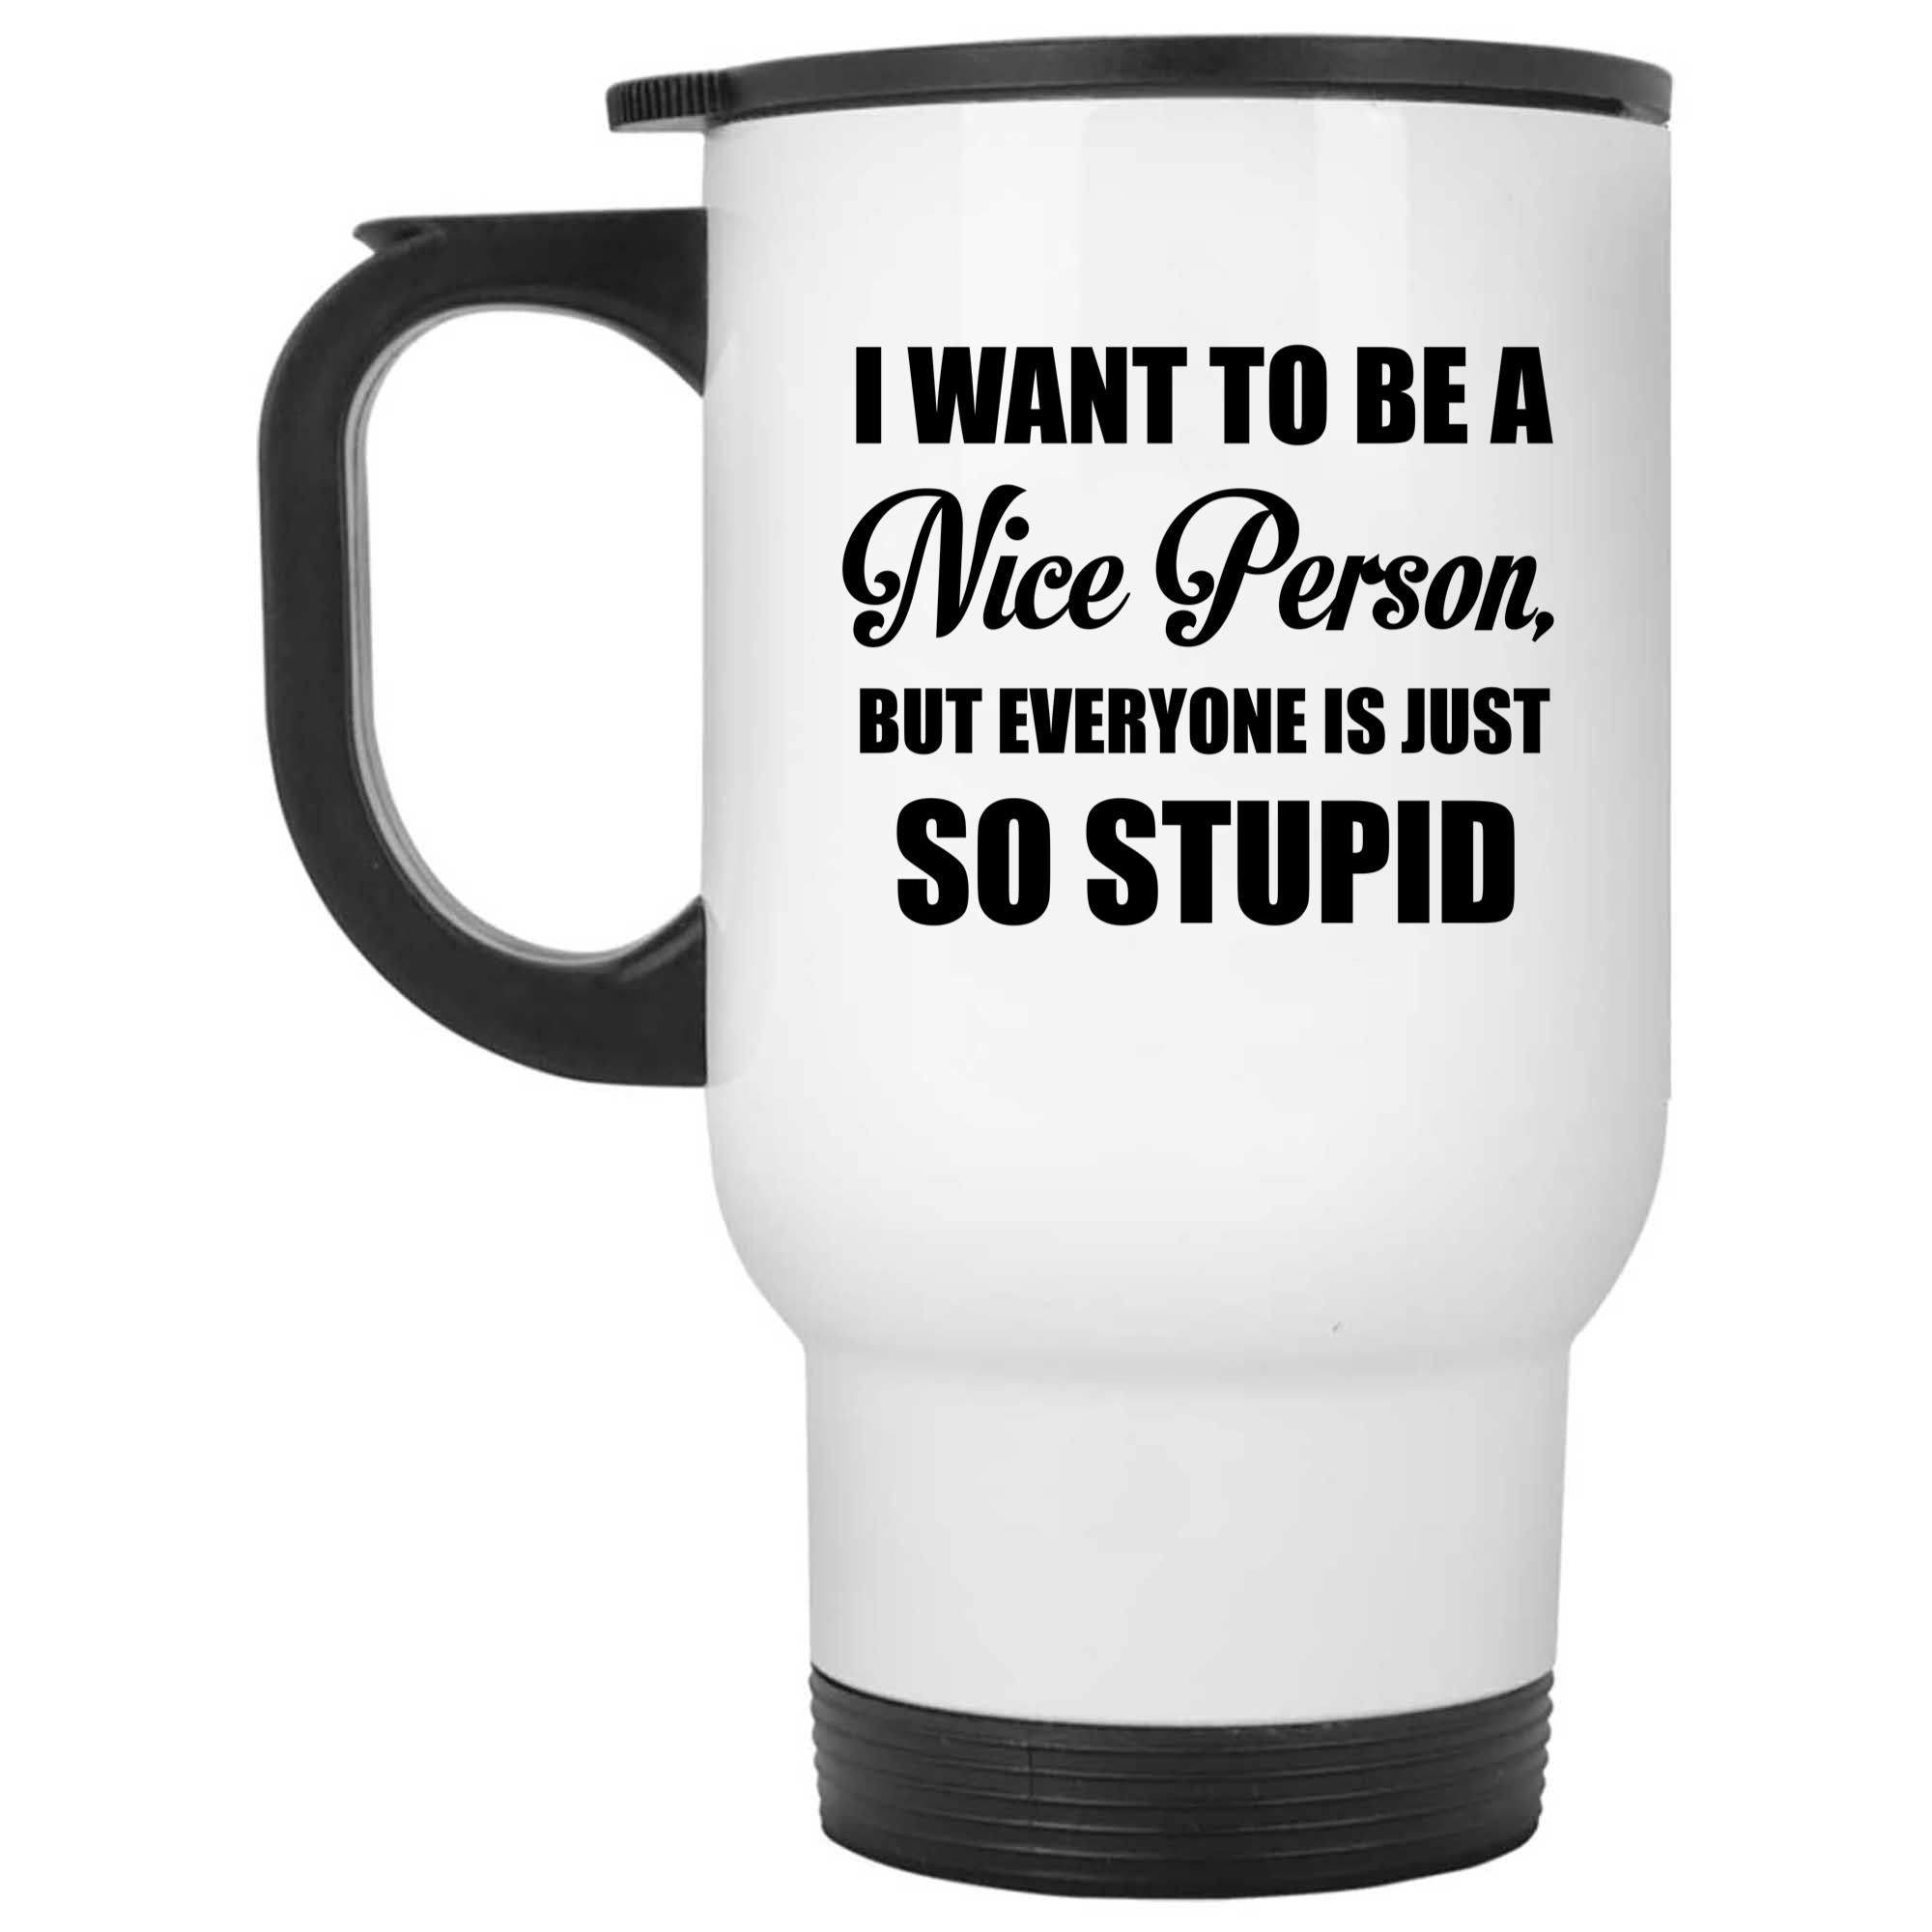 Skitongifts Funny Ceramic Novelty Coffee Mug I Want To Be A Nice Person But Everyone Is Just So Stupid Trending Women Humor Funny Sarcastic tt56HEo